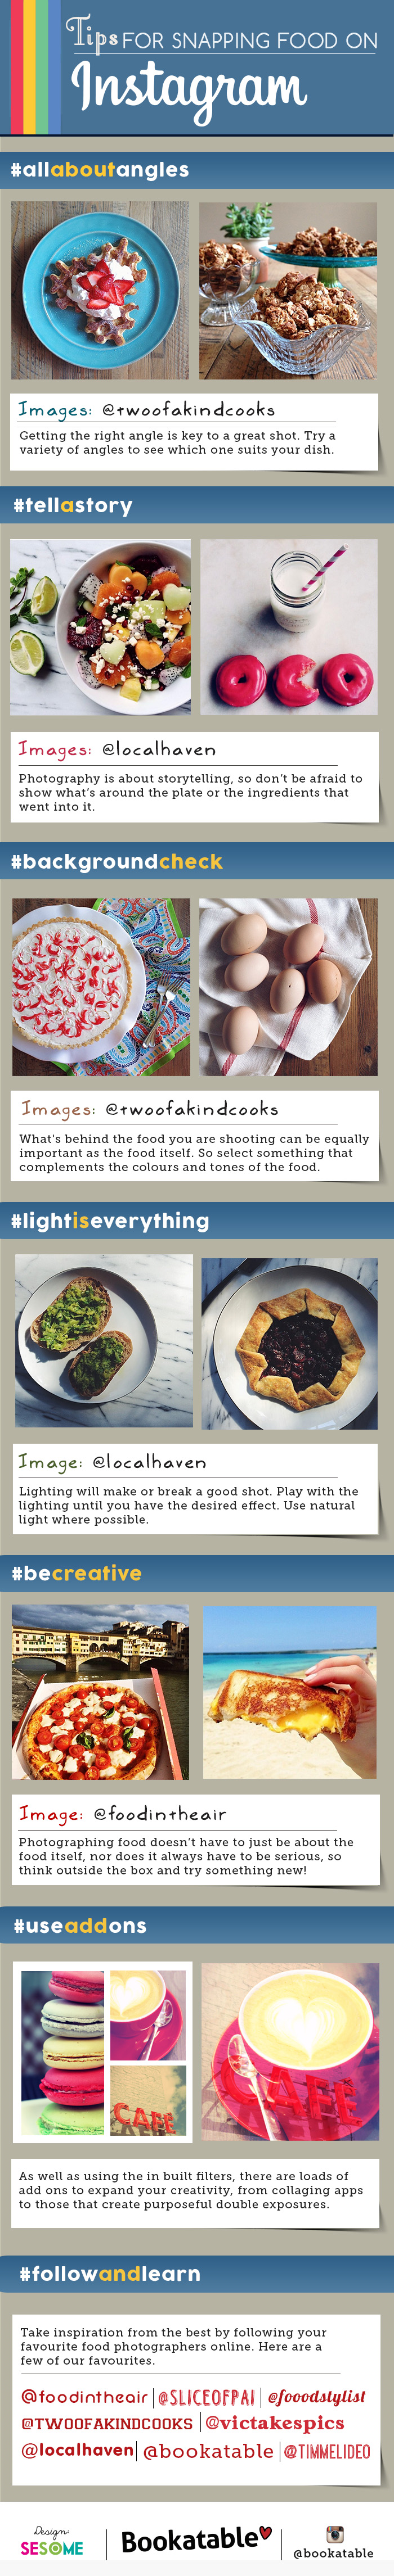 Tips on Snapping Food on Instagram